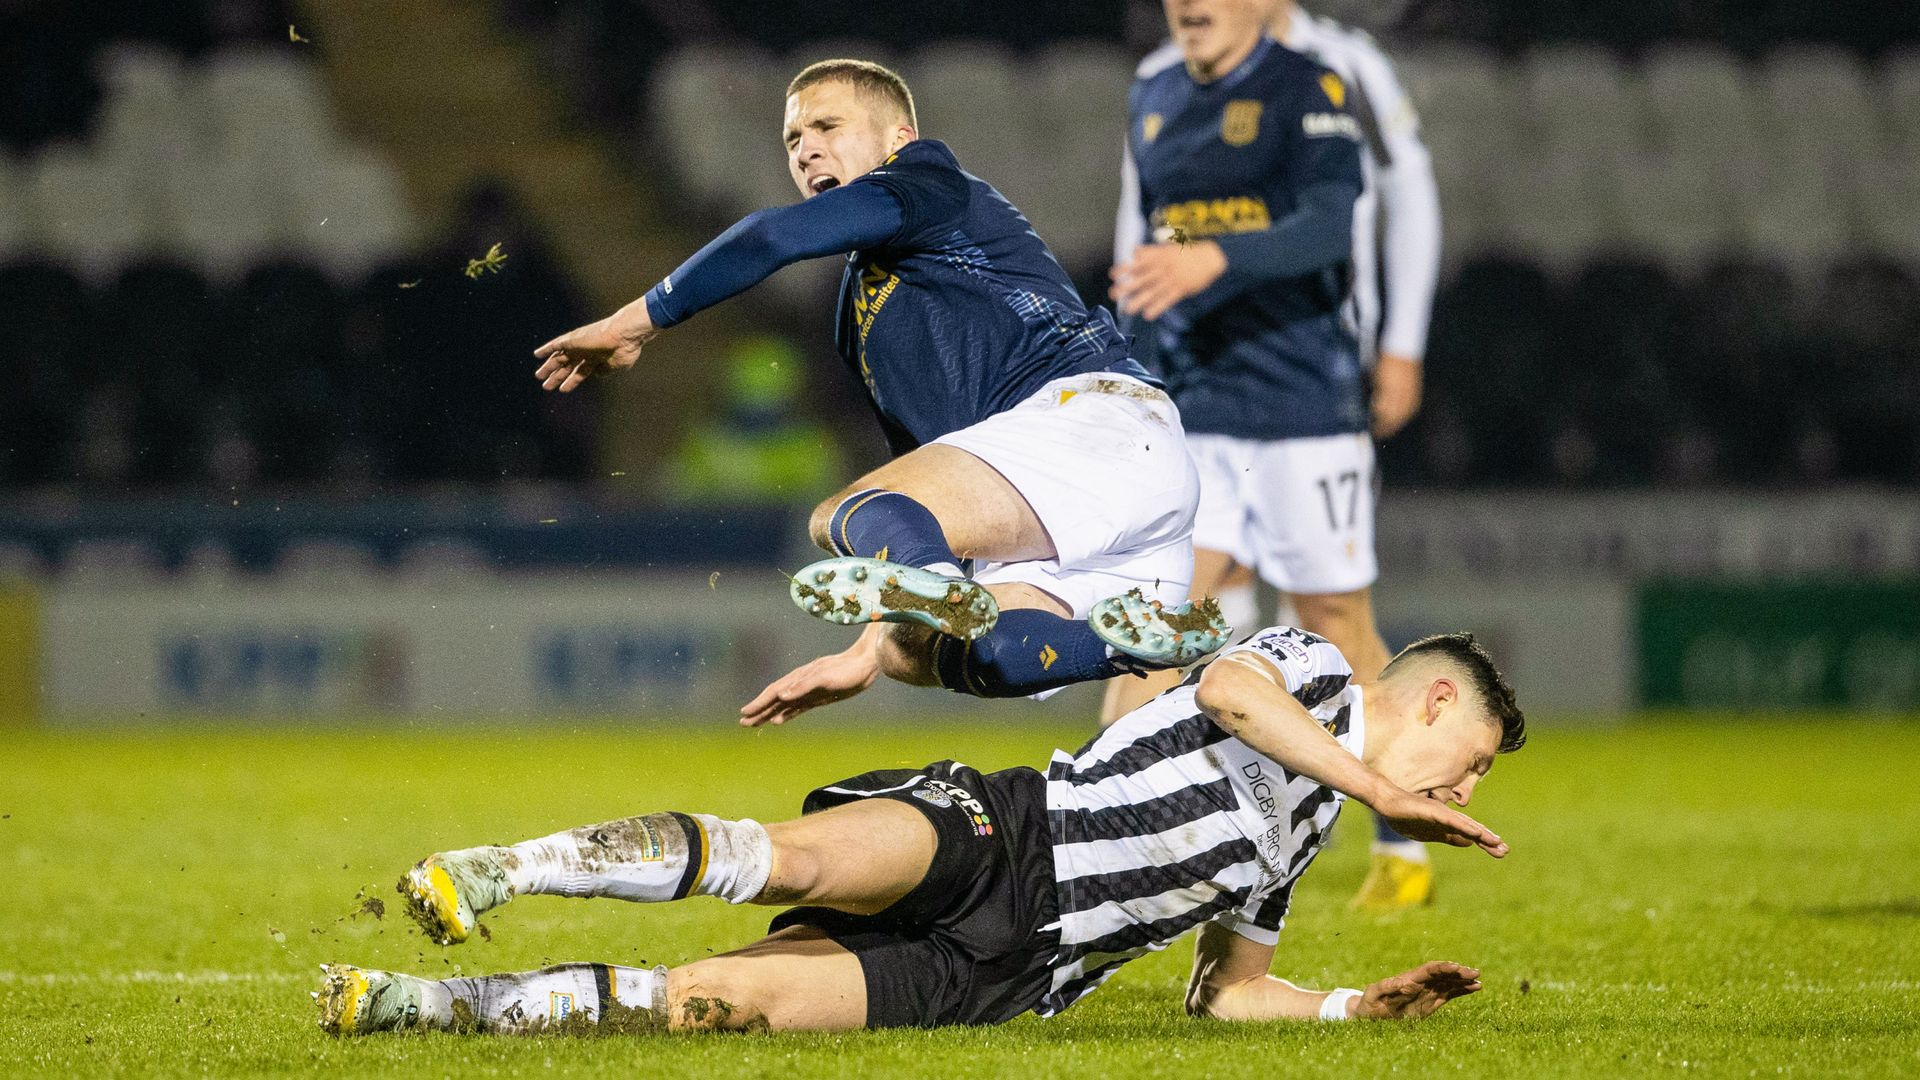 St Mirren want clarification as appeal over Bolton red dismissed